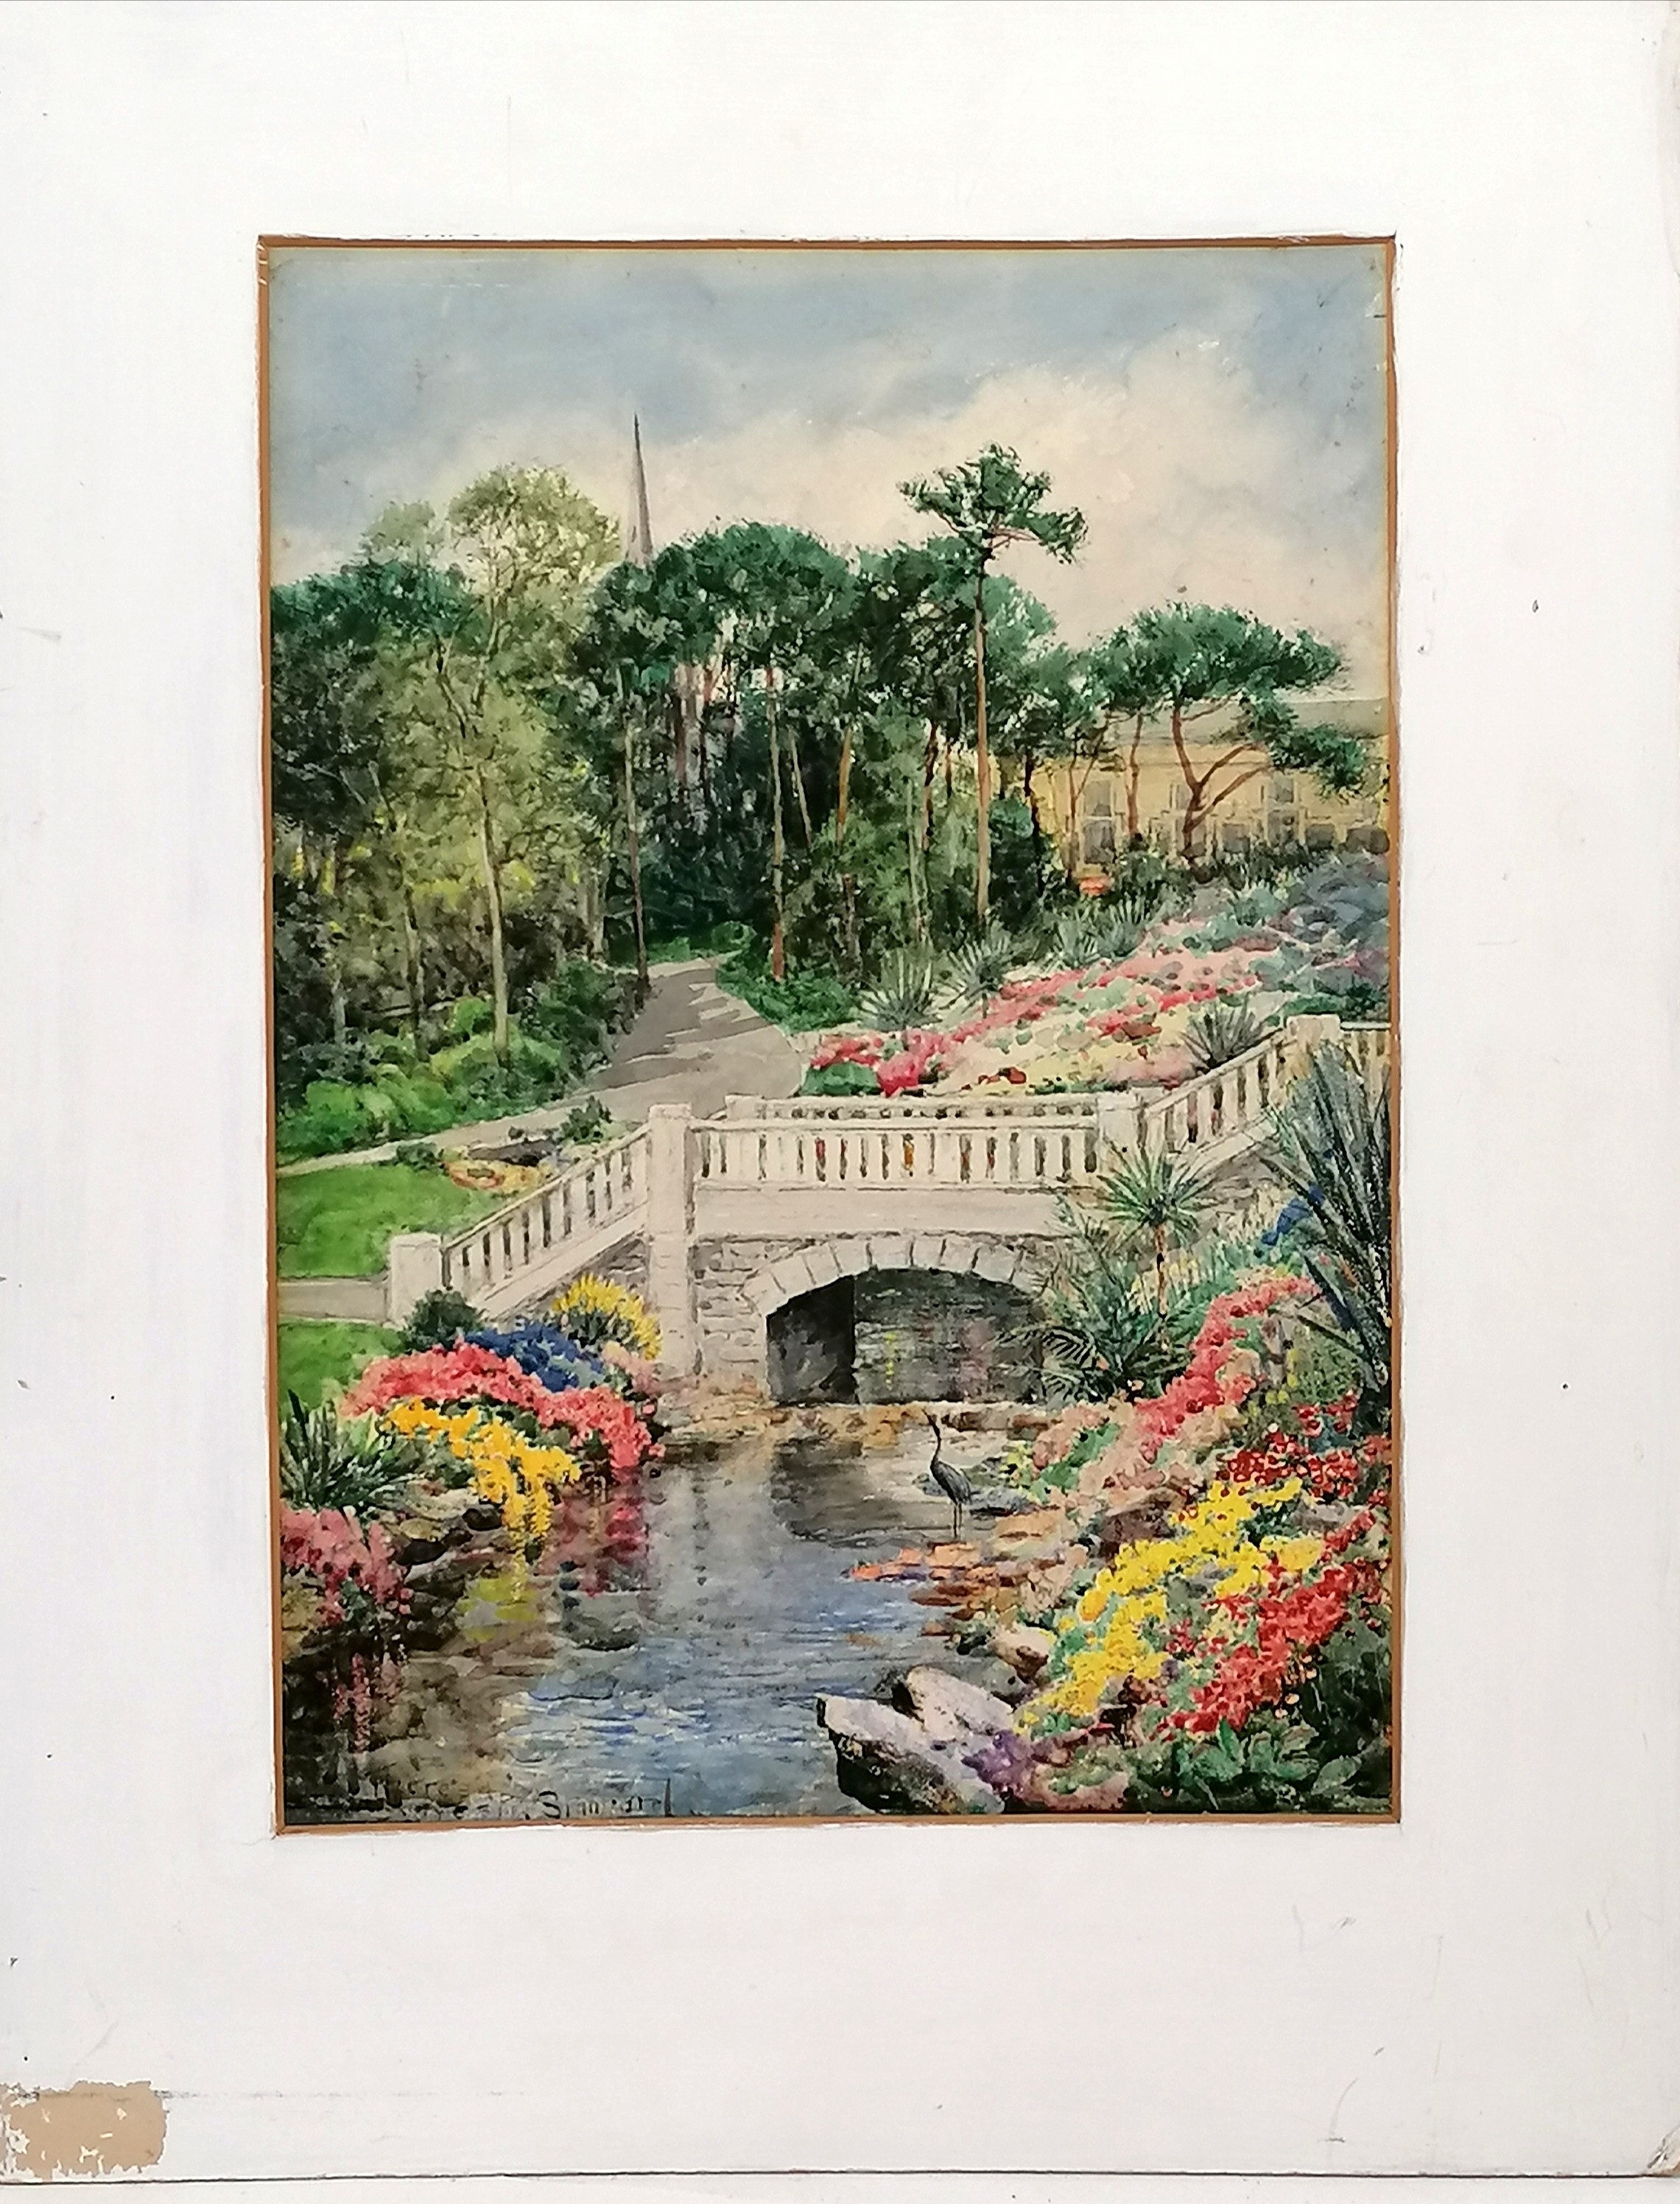 Mounted watercolour painting of a Bournemouth park scene by Theresa Sylvester Stannard (1898-1947) -